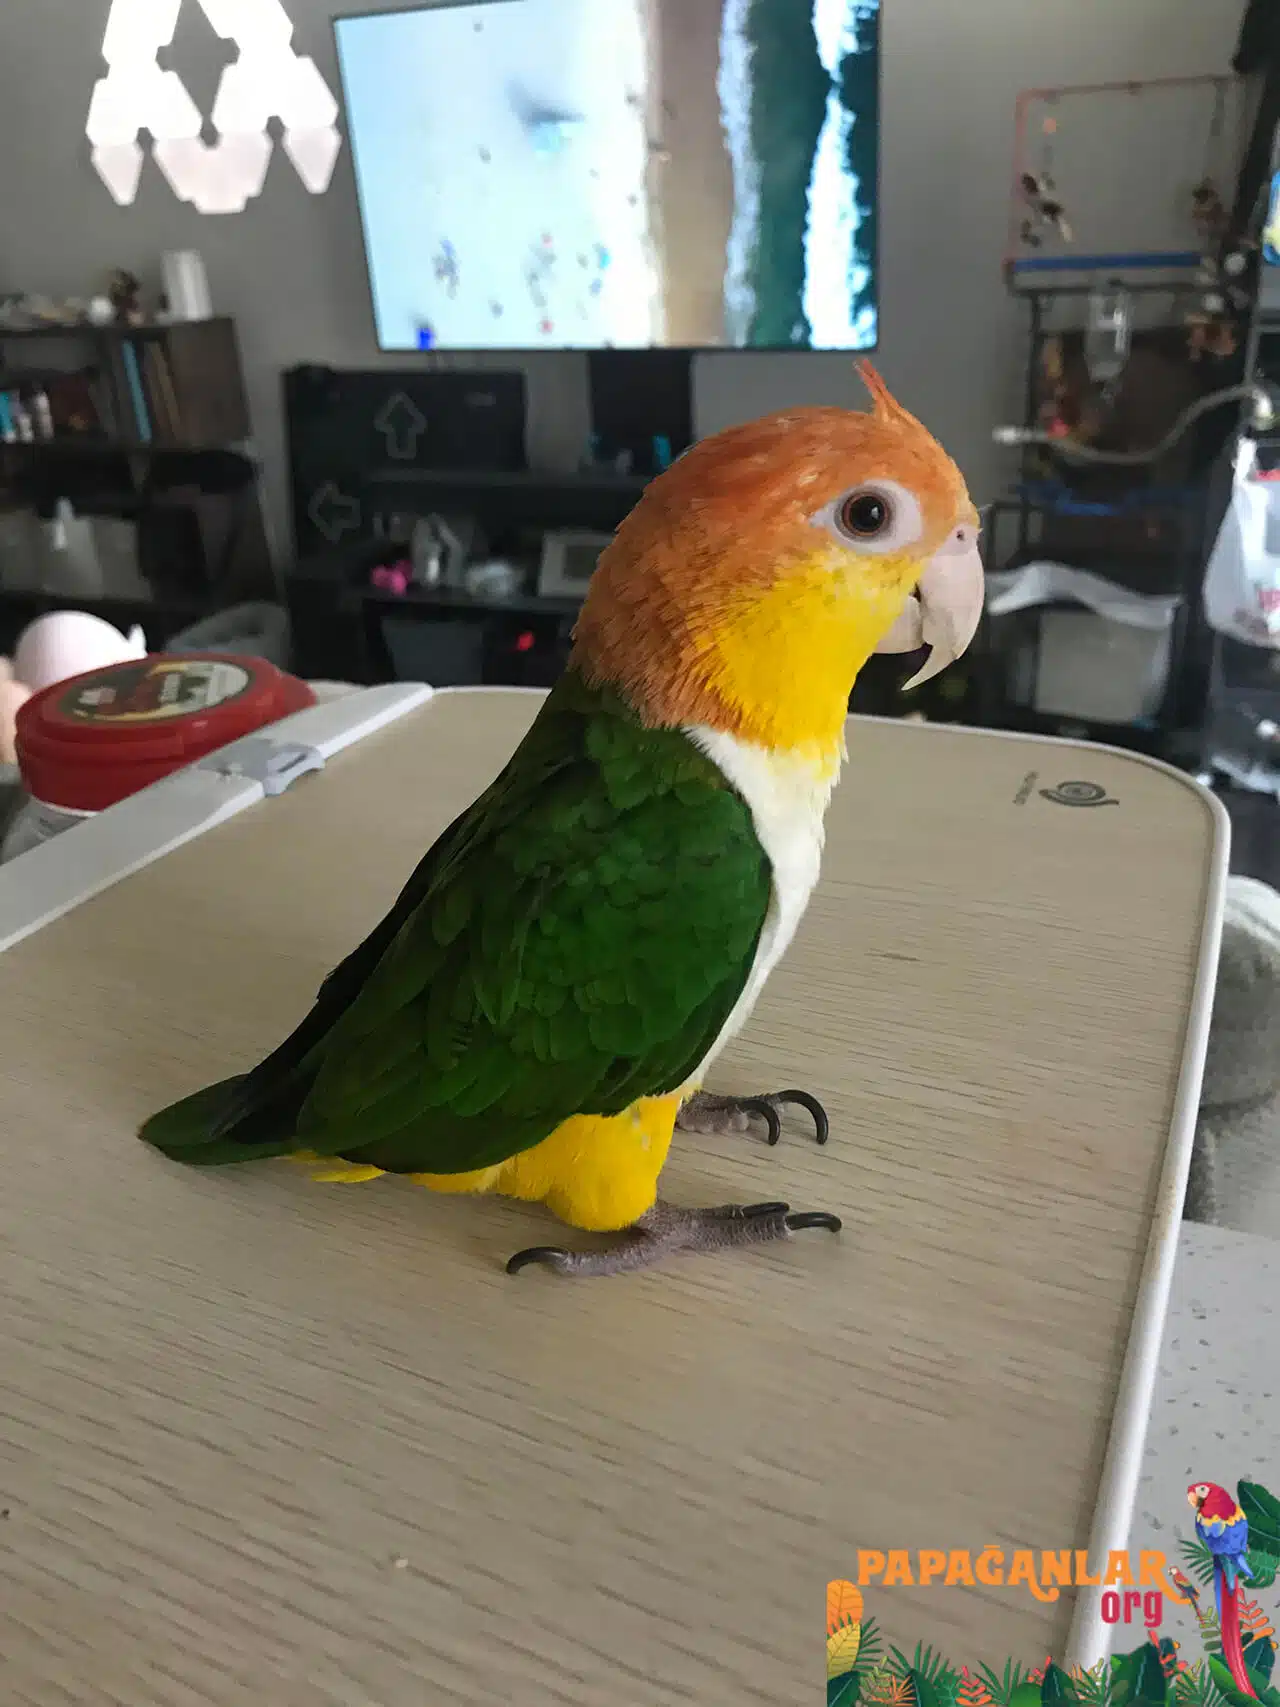 where can i find caique parrot